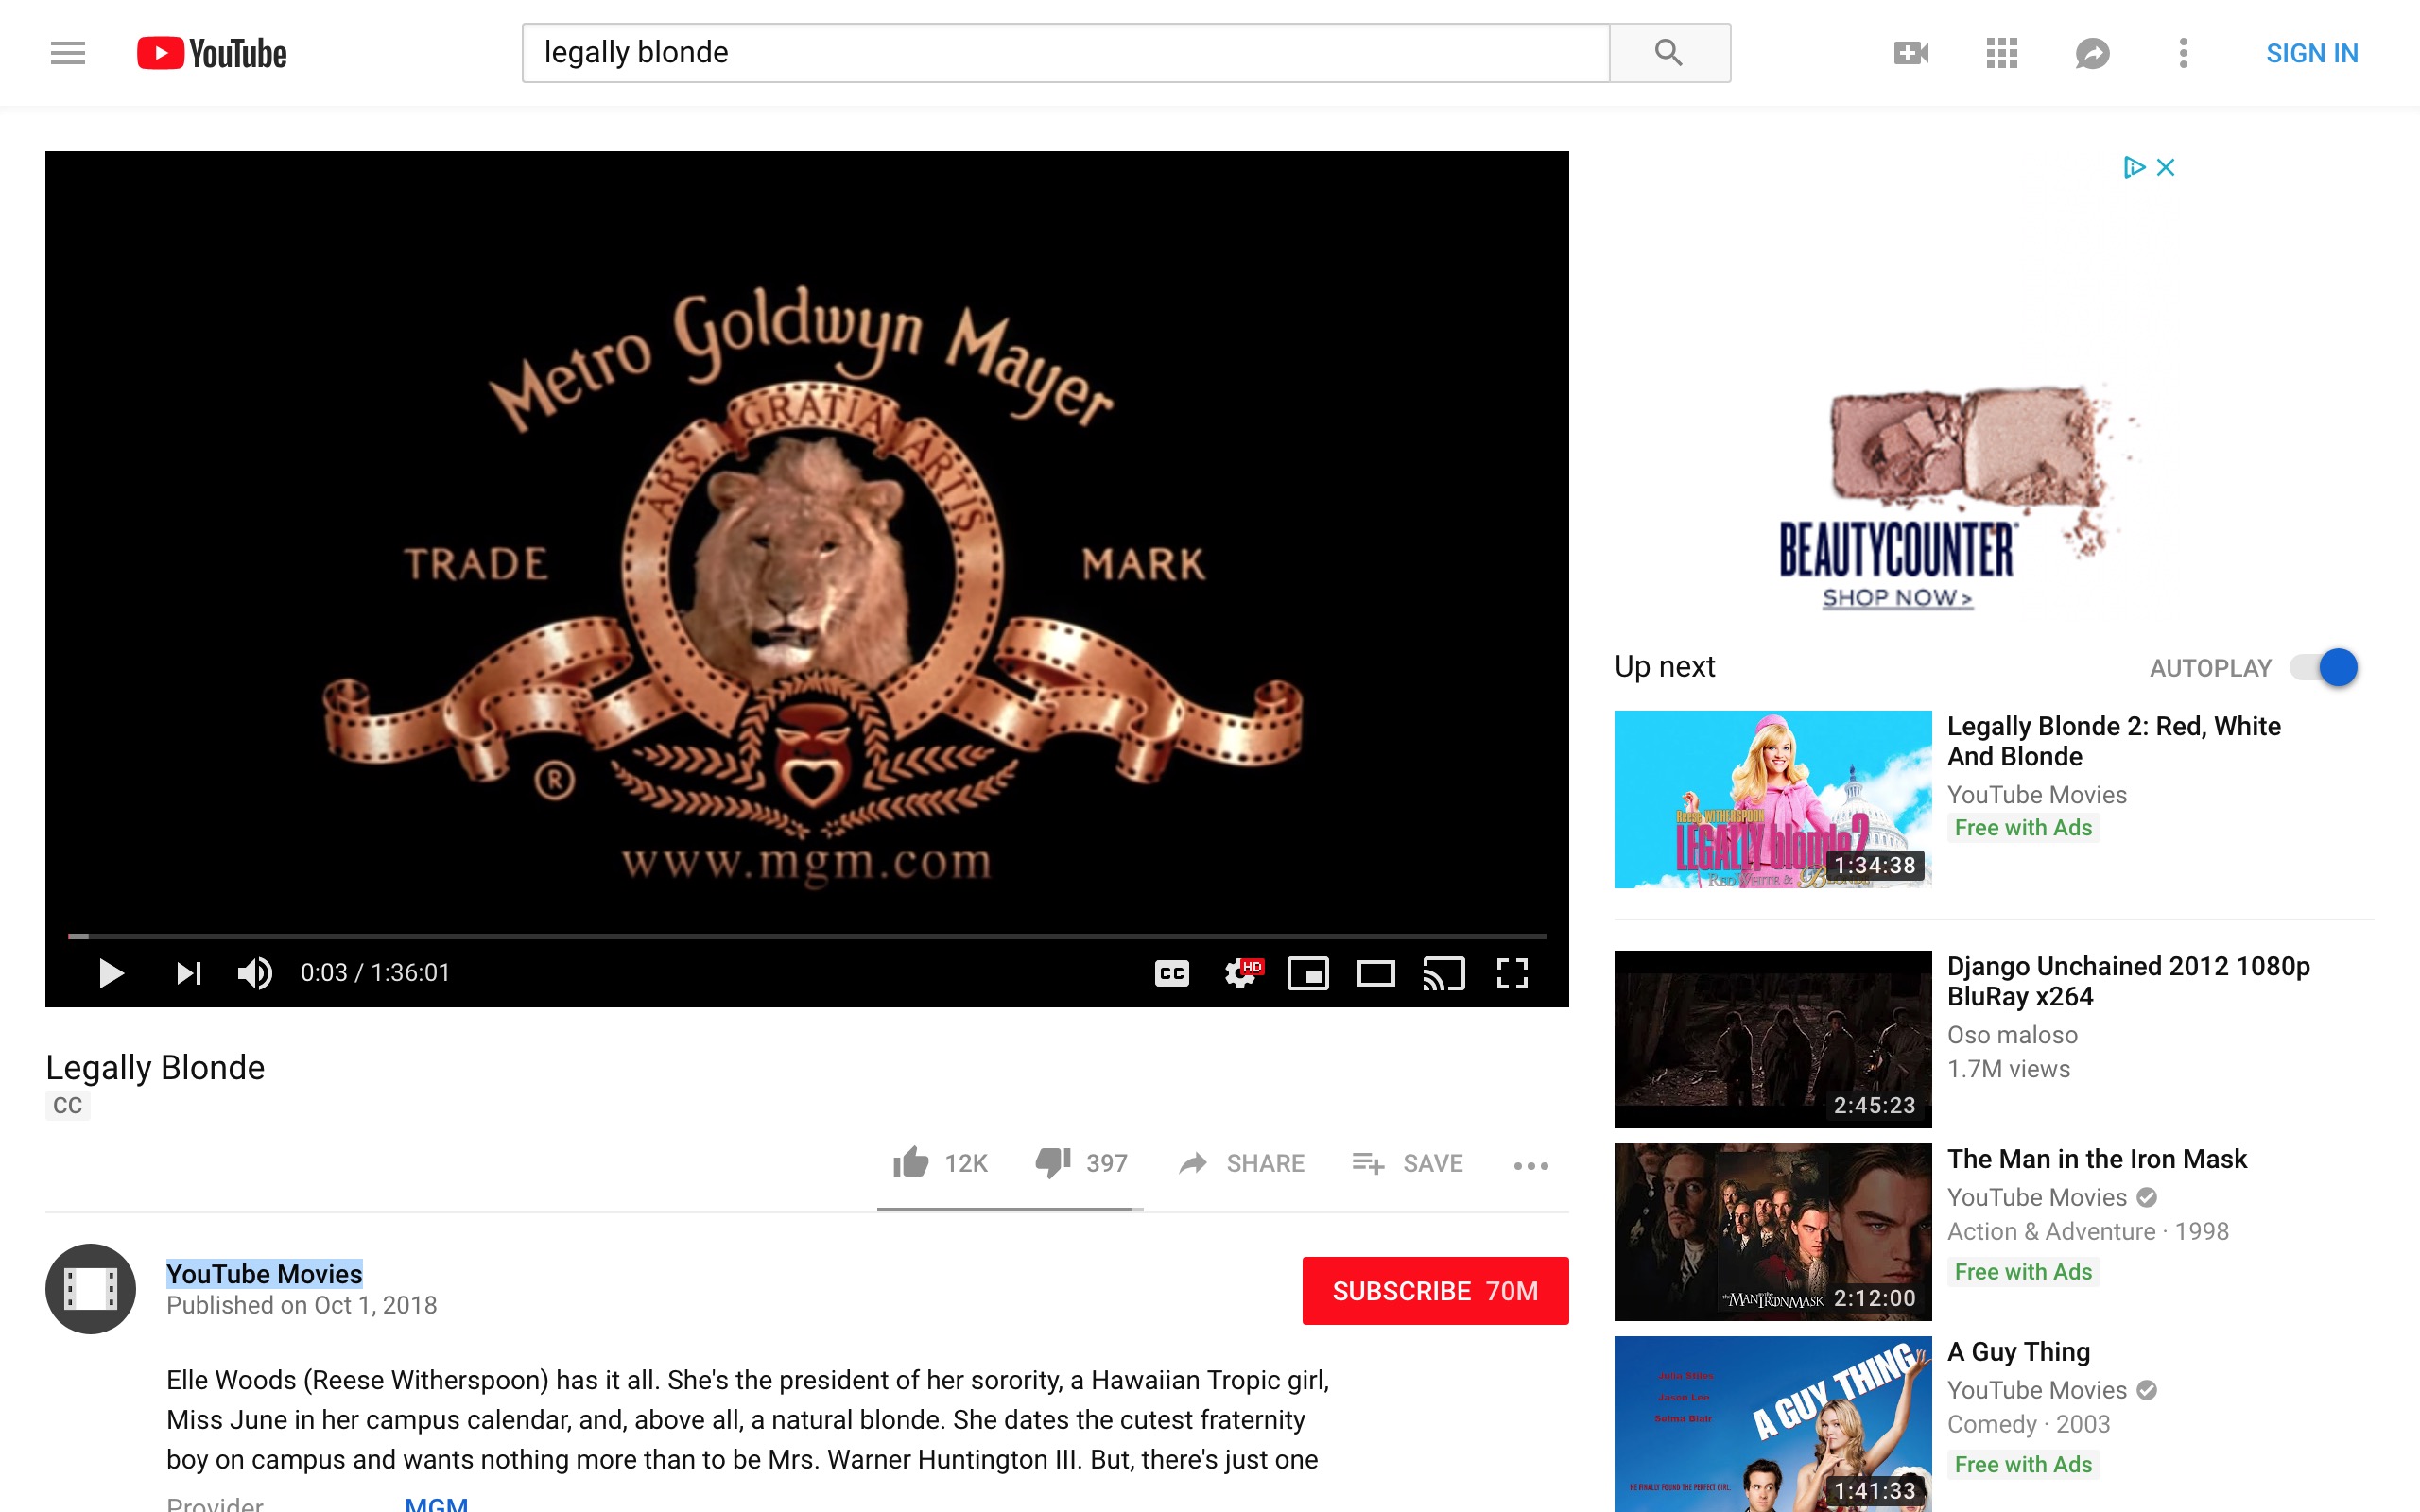 how download youtube movies free